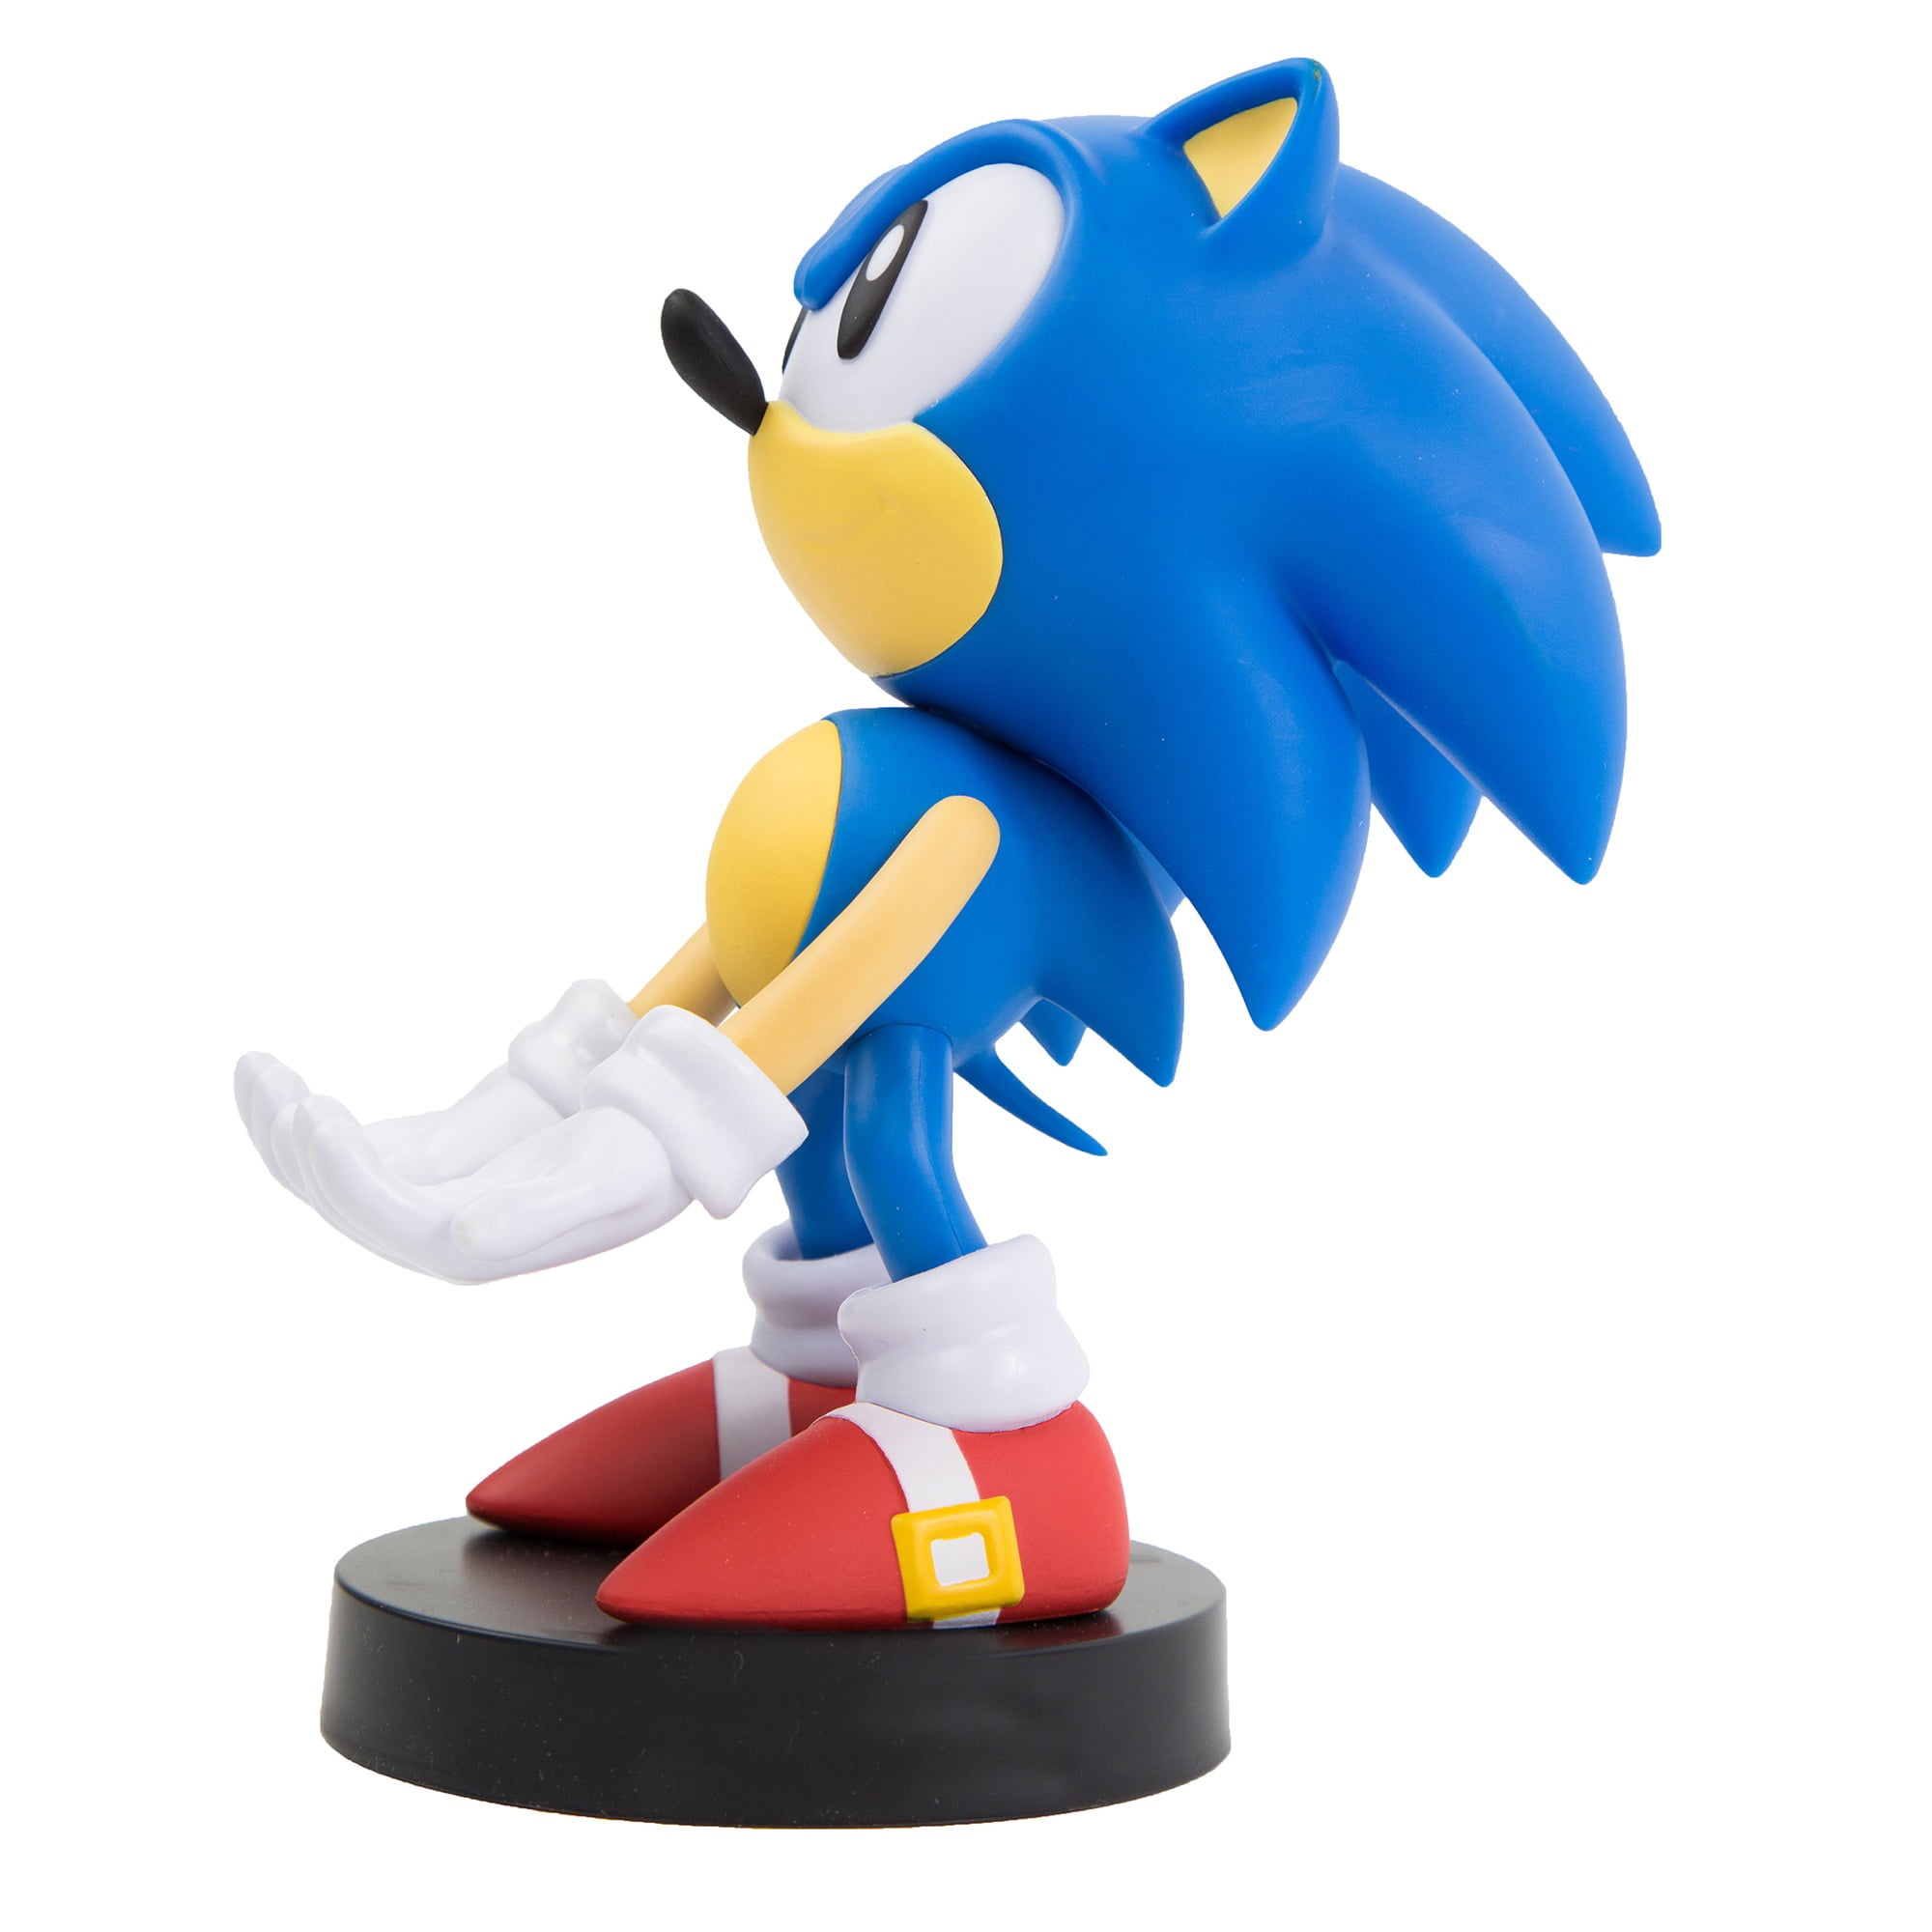 enke Barry mærkelig Exquisite Gaming: Sonic - Mobile Phone & Gaming Controller Holder, Sonic  The Hedgehog Device Stand, Cable Guys, Sony Licensed Figure - Walmart.com